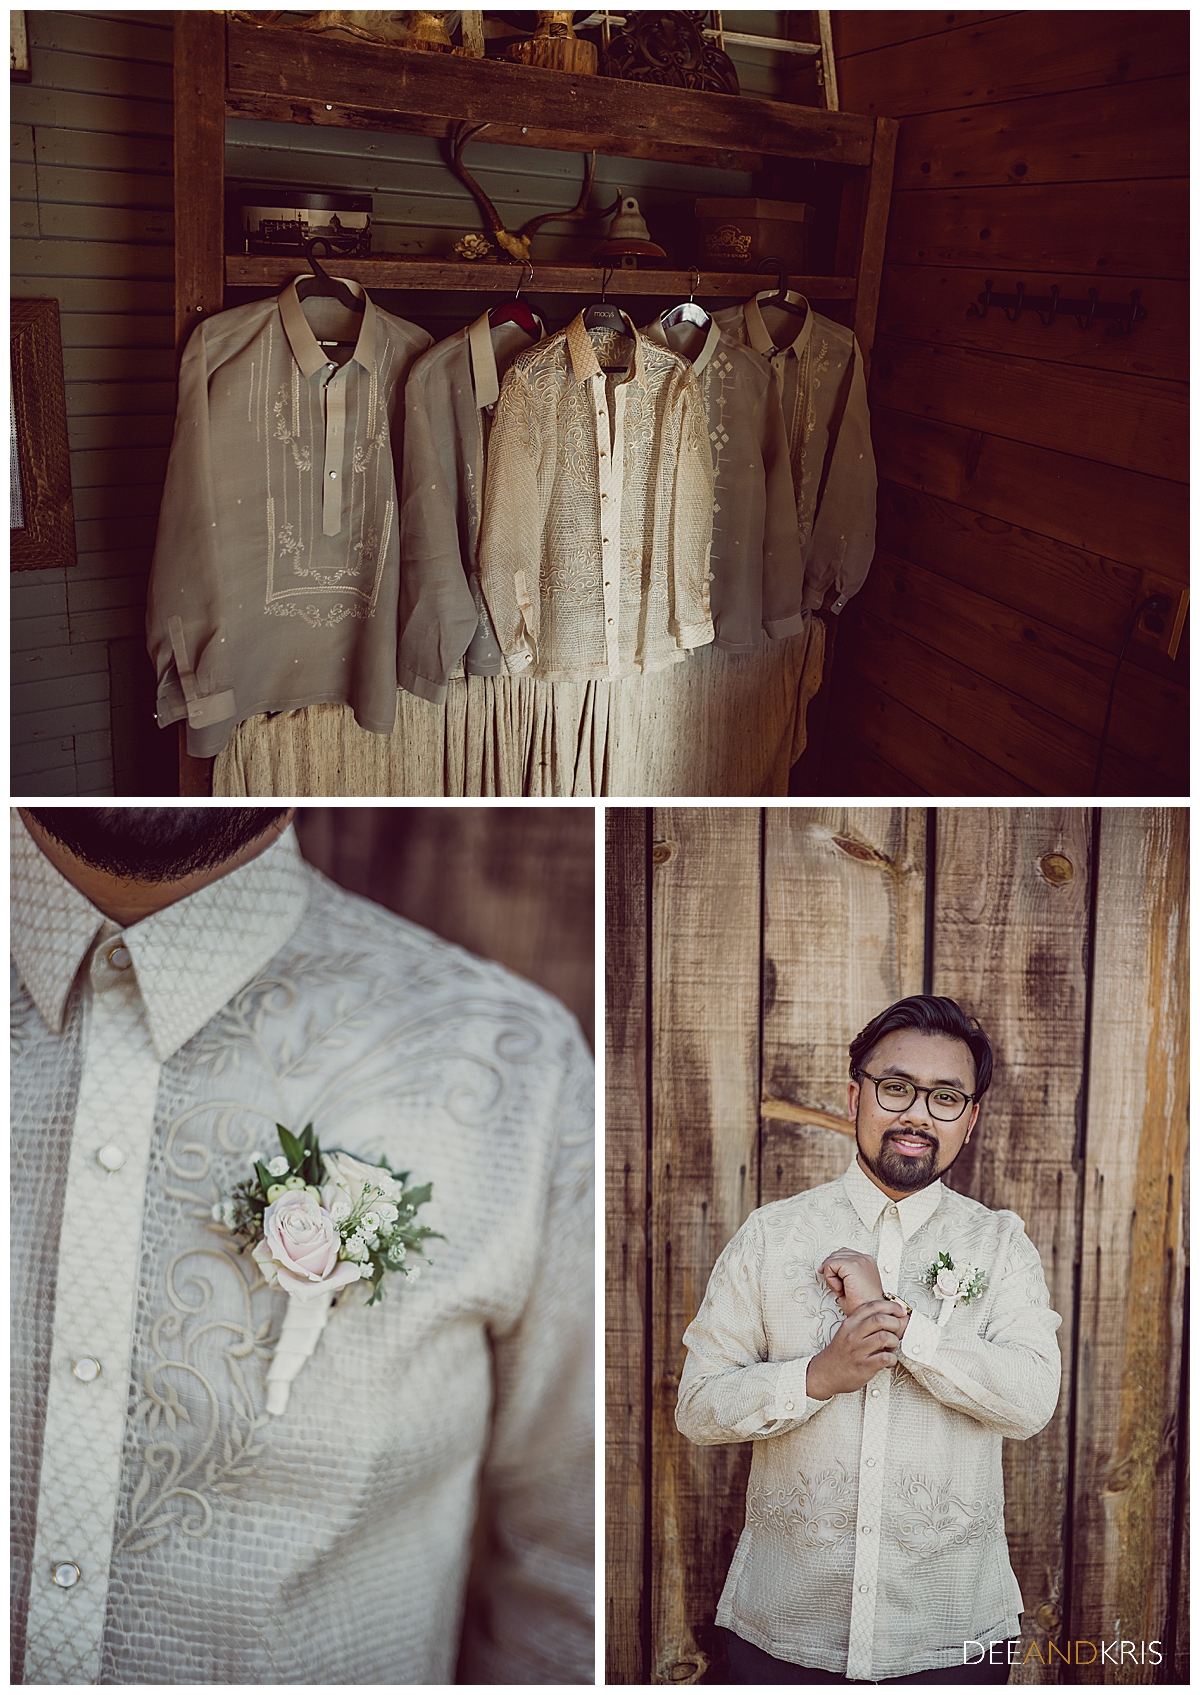 Three images of groom getting ready in his traditional Filipino barong.